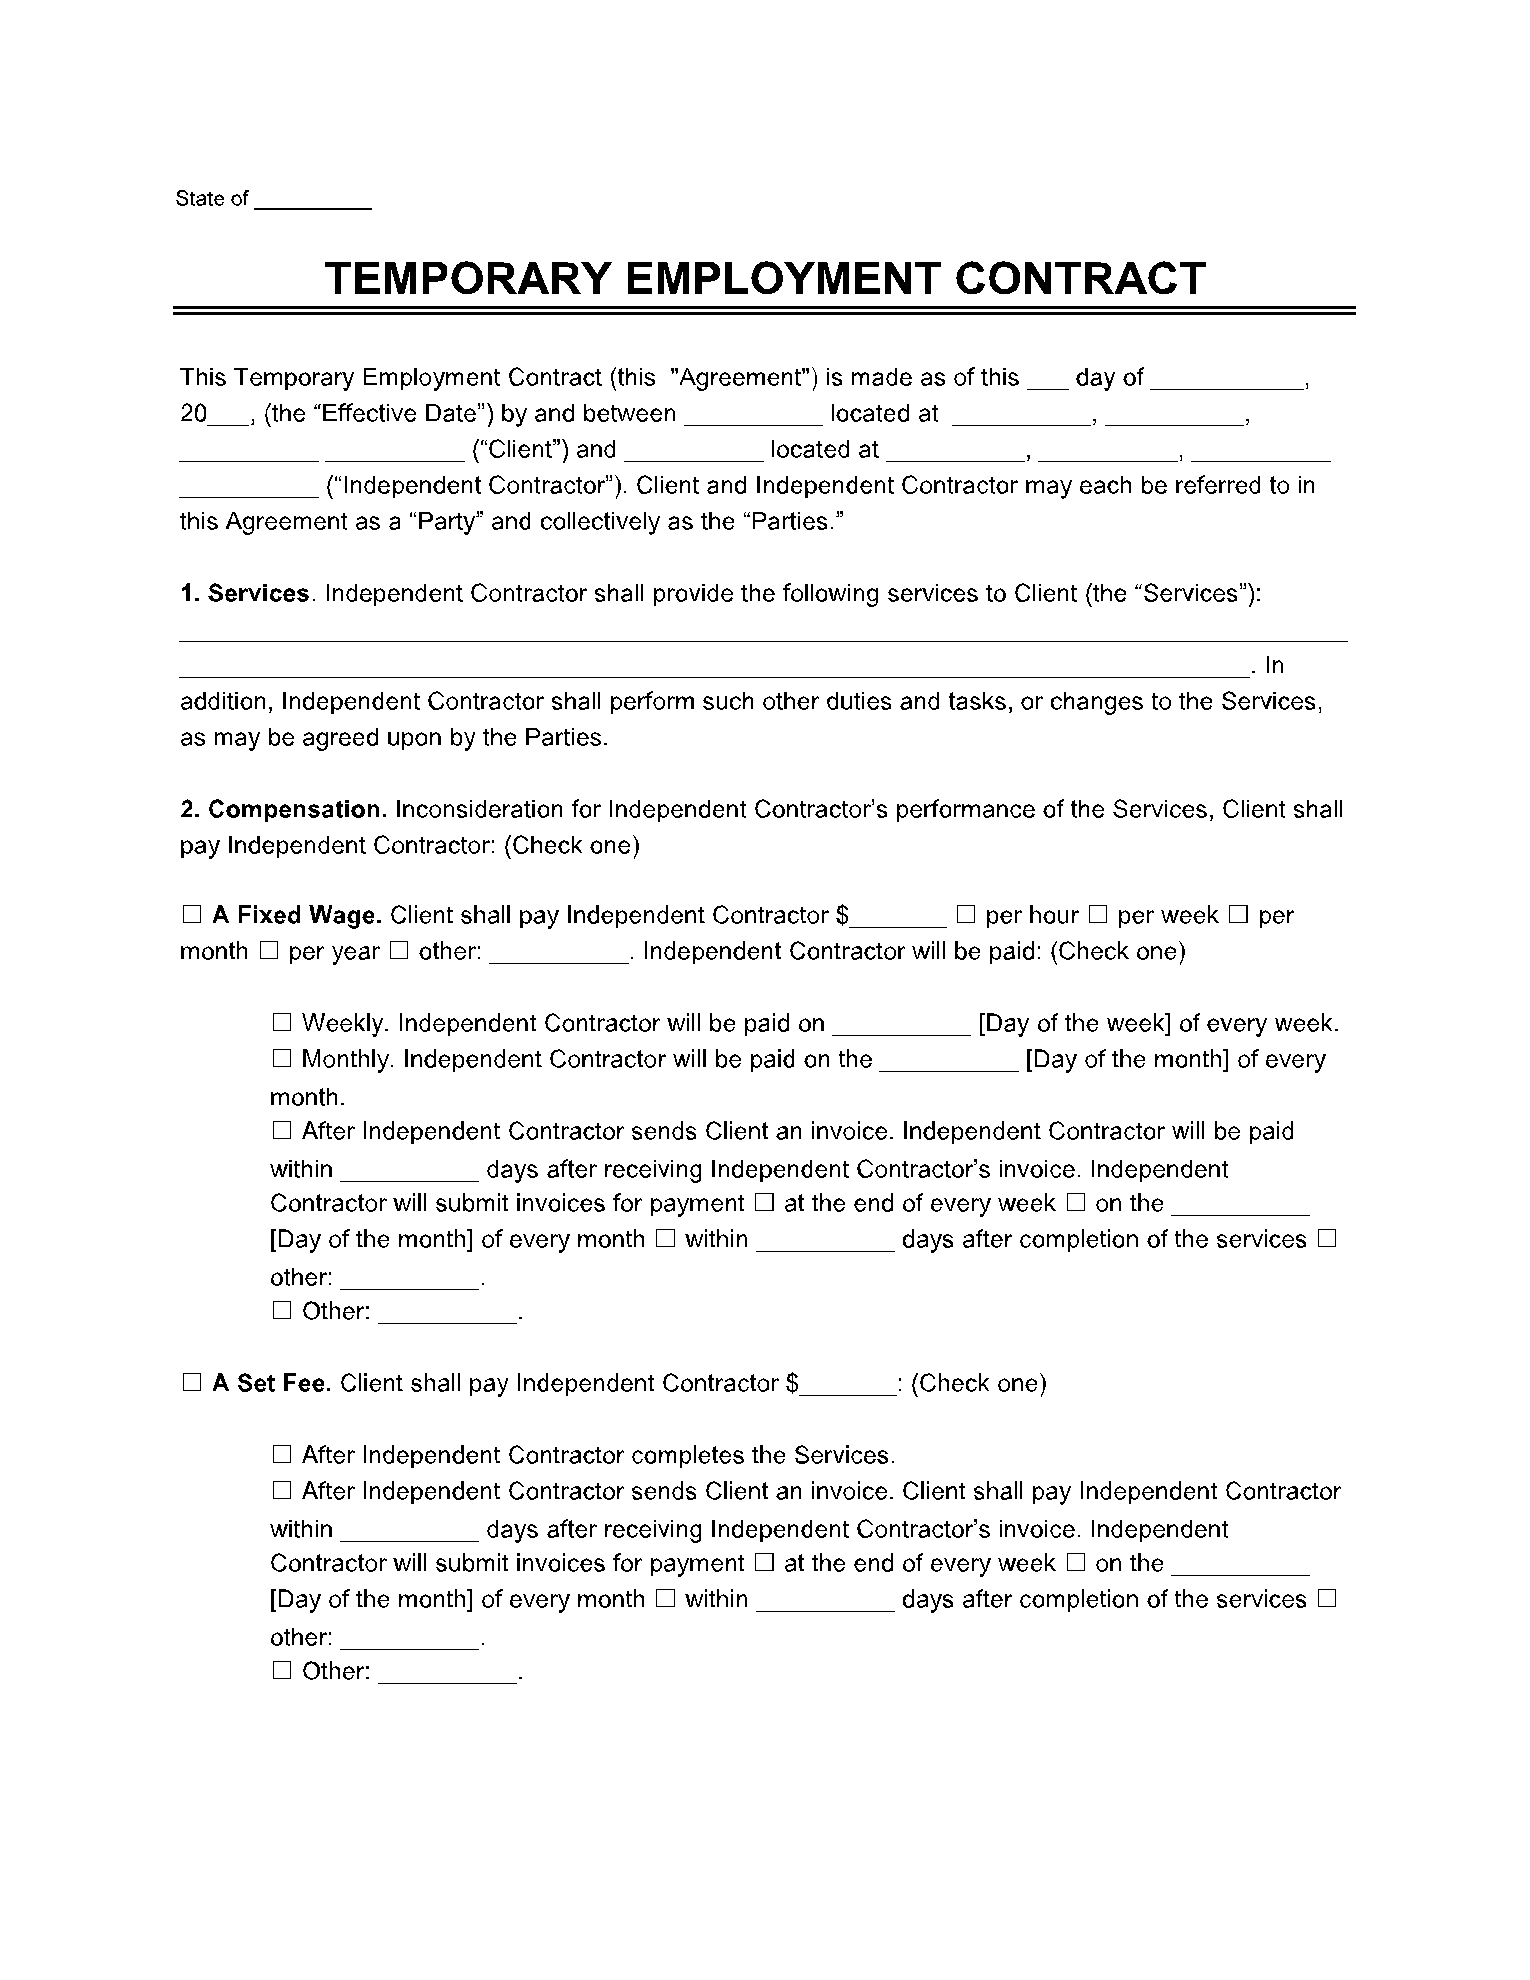 Temporary Employment Contract